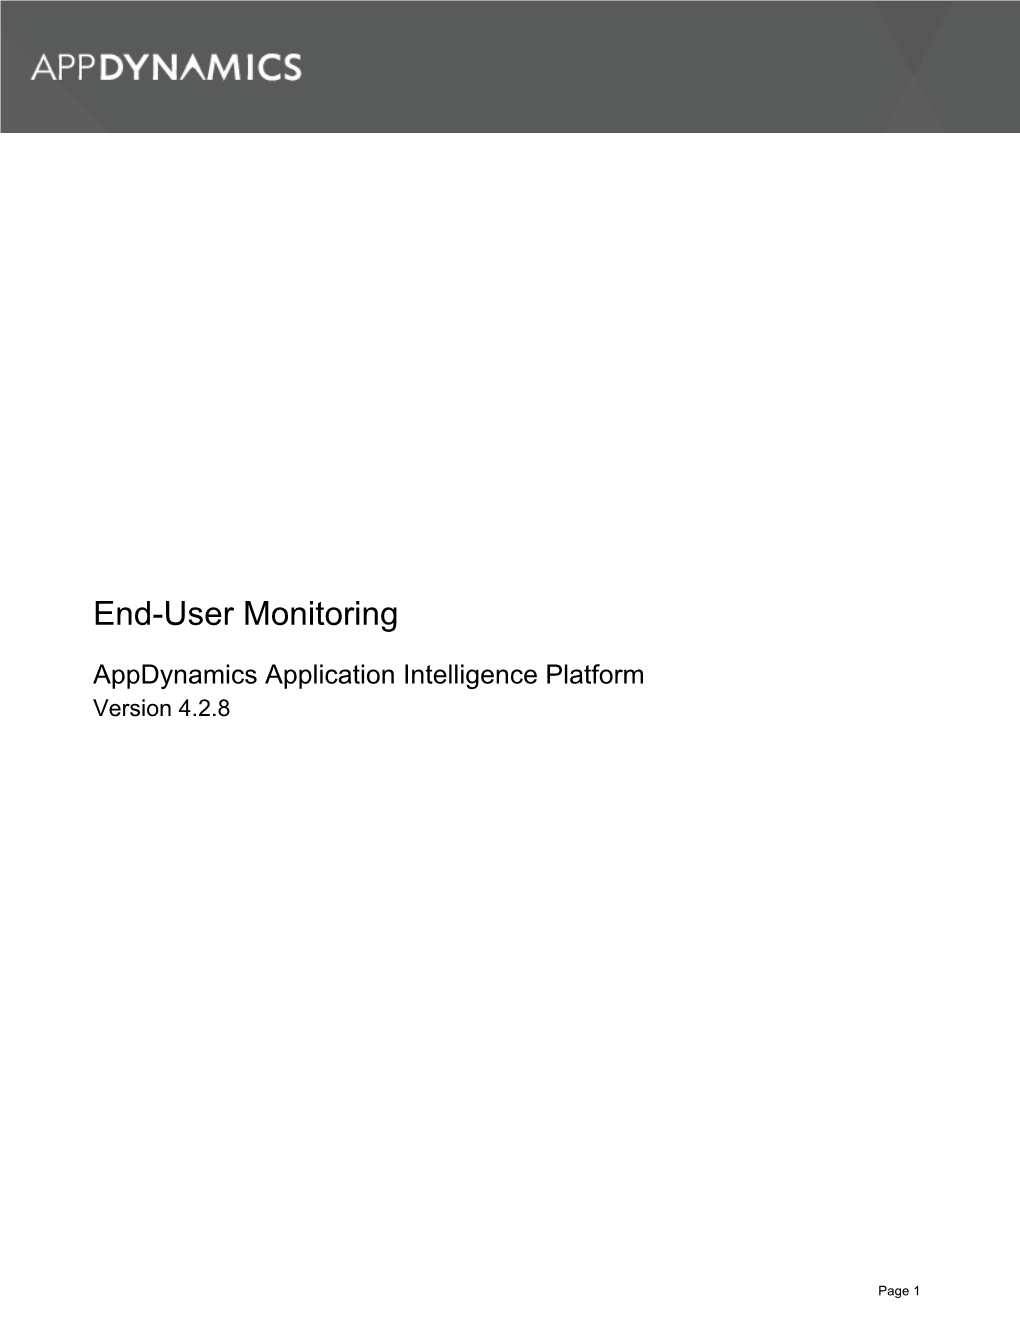 End-User Monitoring